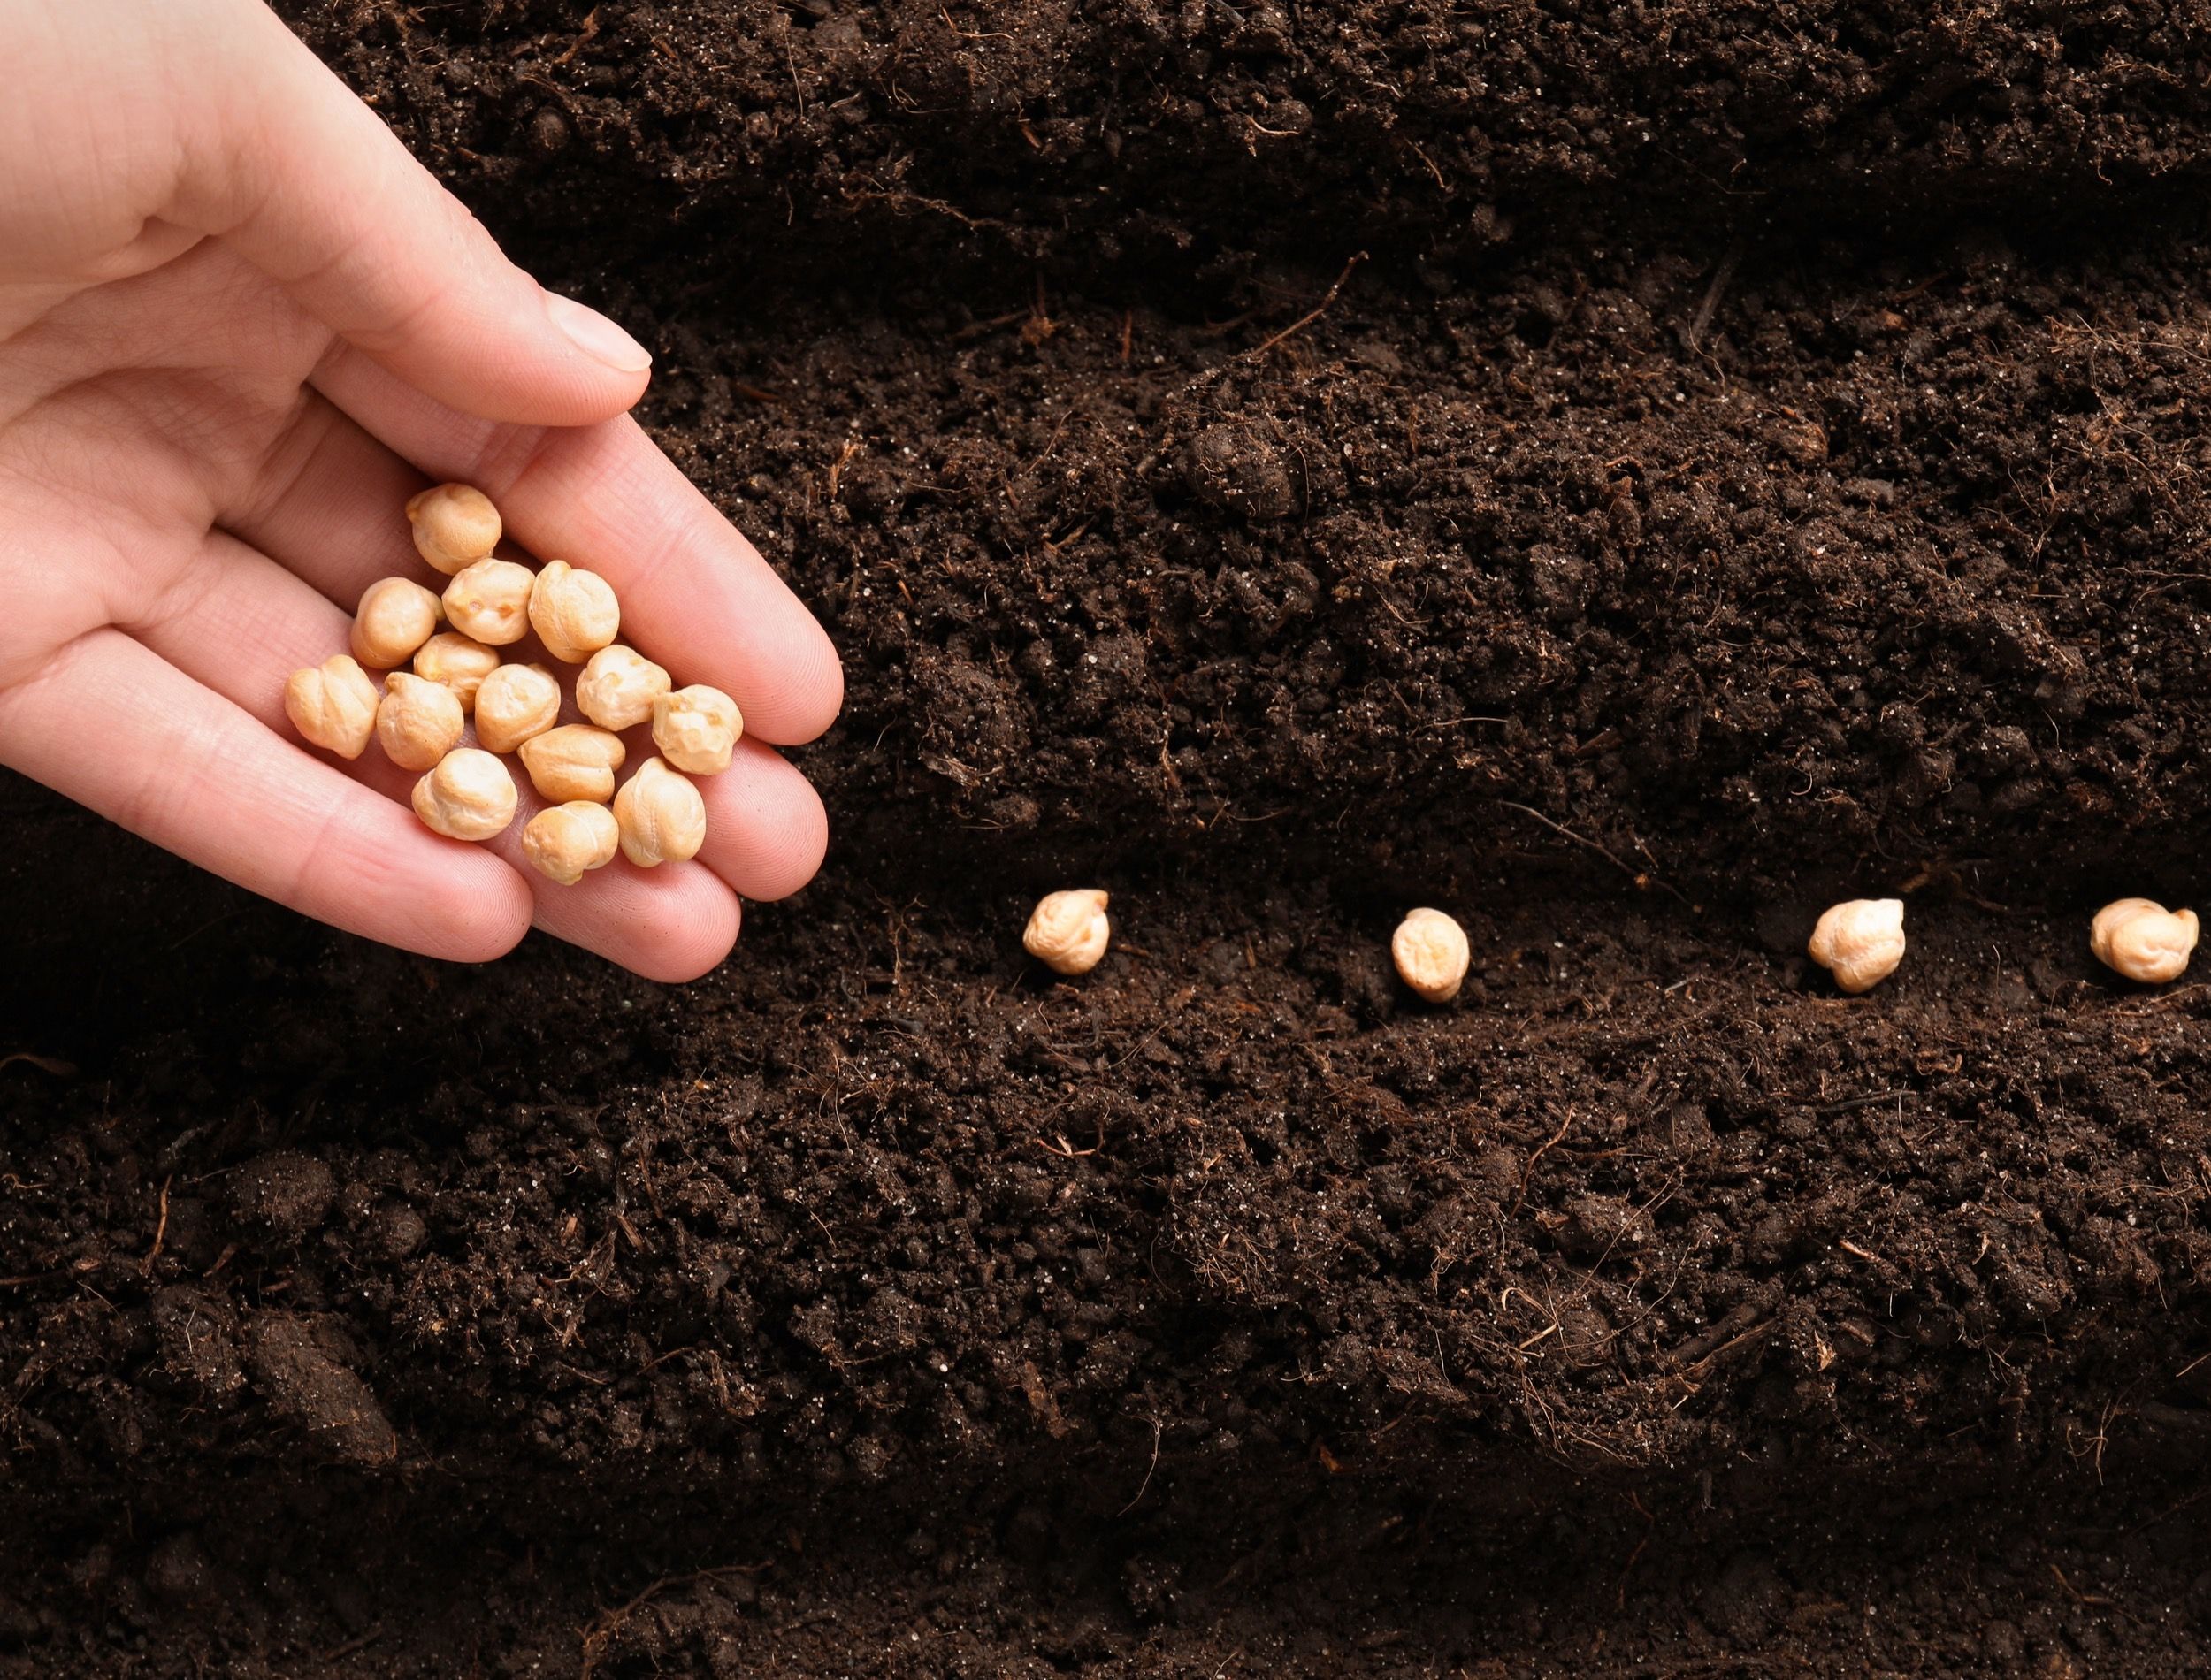 Woman planting chickpea seeds into fertile soil, top view. Vegetable growing